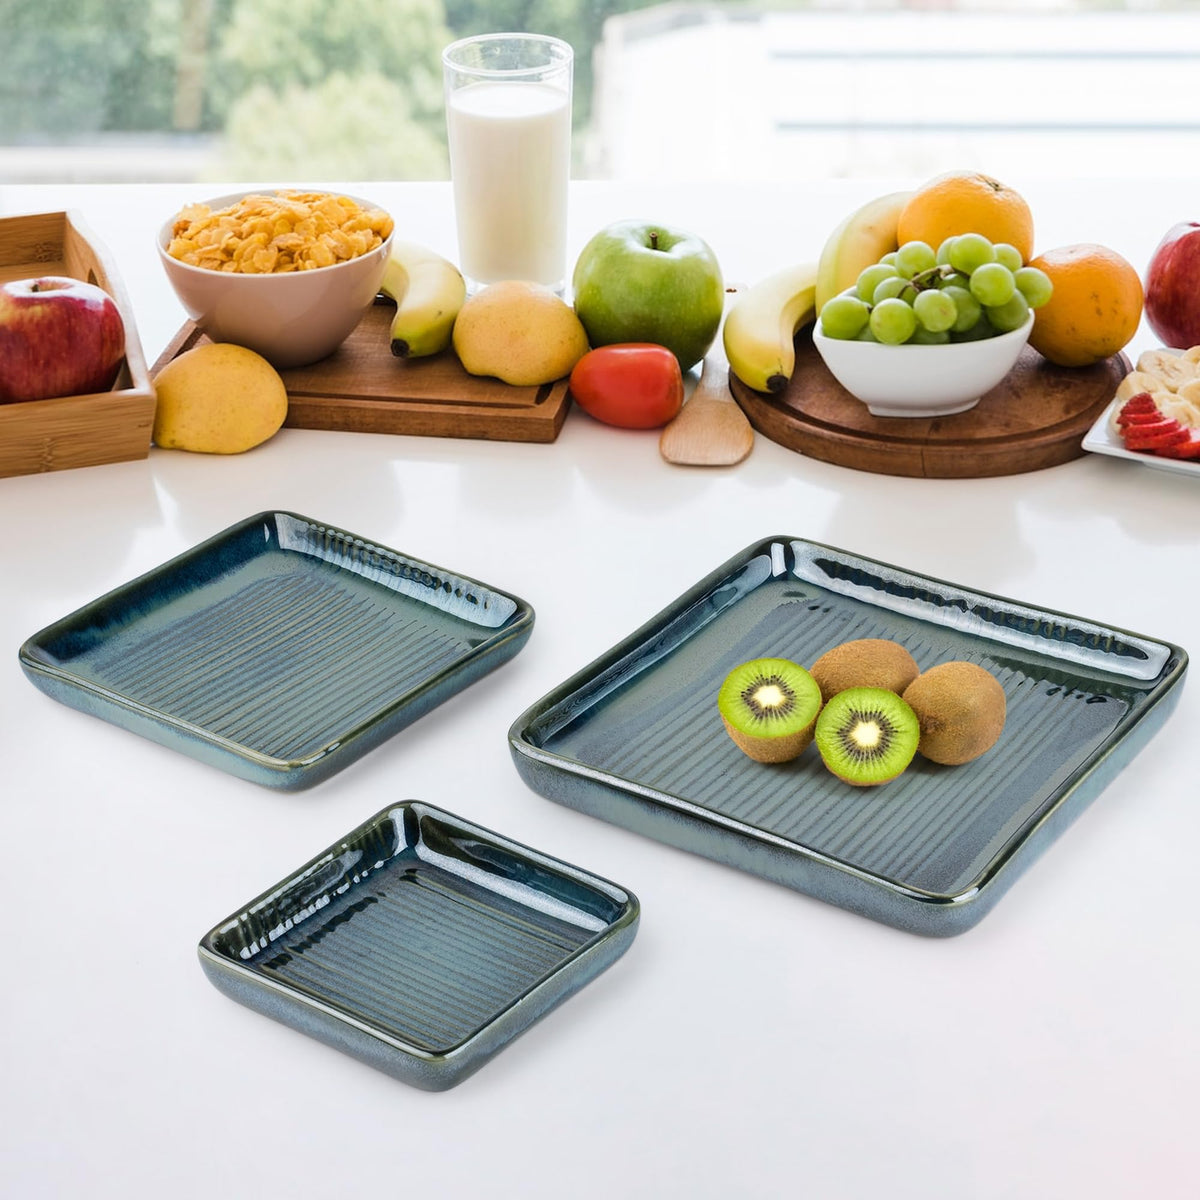 USHA SHRIRAM Ceramic Tray for Serving | Serving Tray Set of 3 | Dry Fruit Tray for Serving | Square Tray | Ceramic Serving Platter Set | Platter Tray | Snack Tray | Microwave Safe Plates (Green)